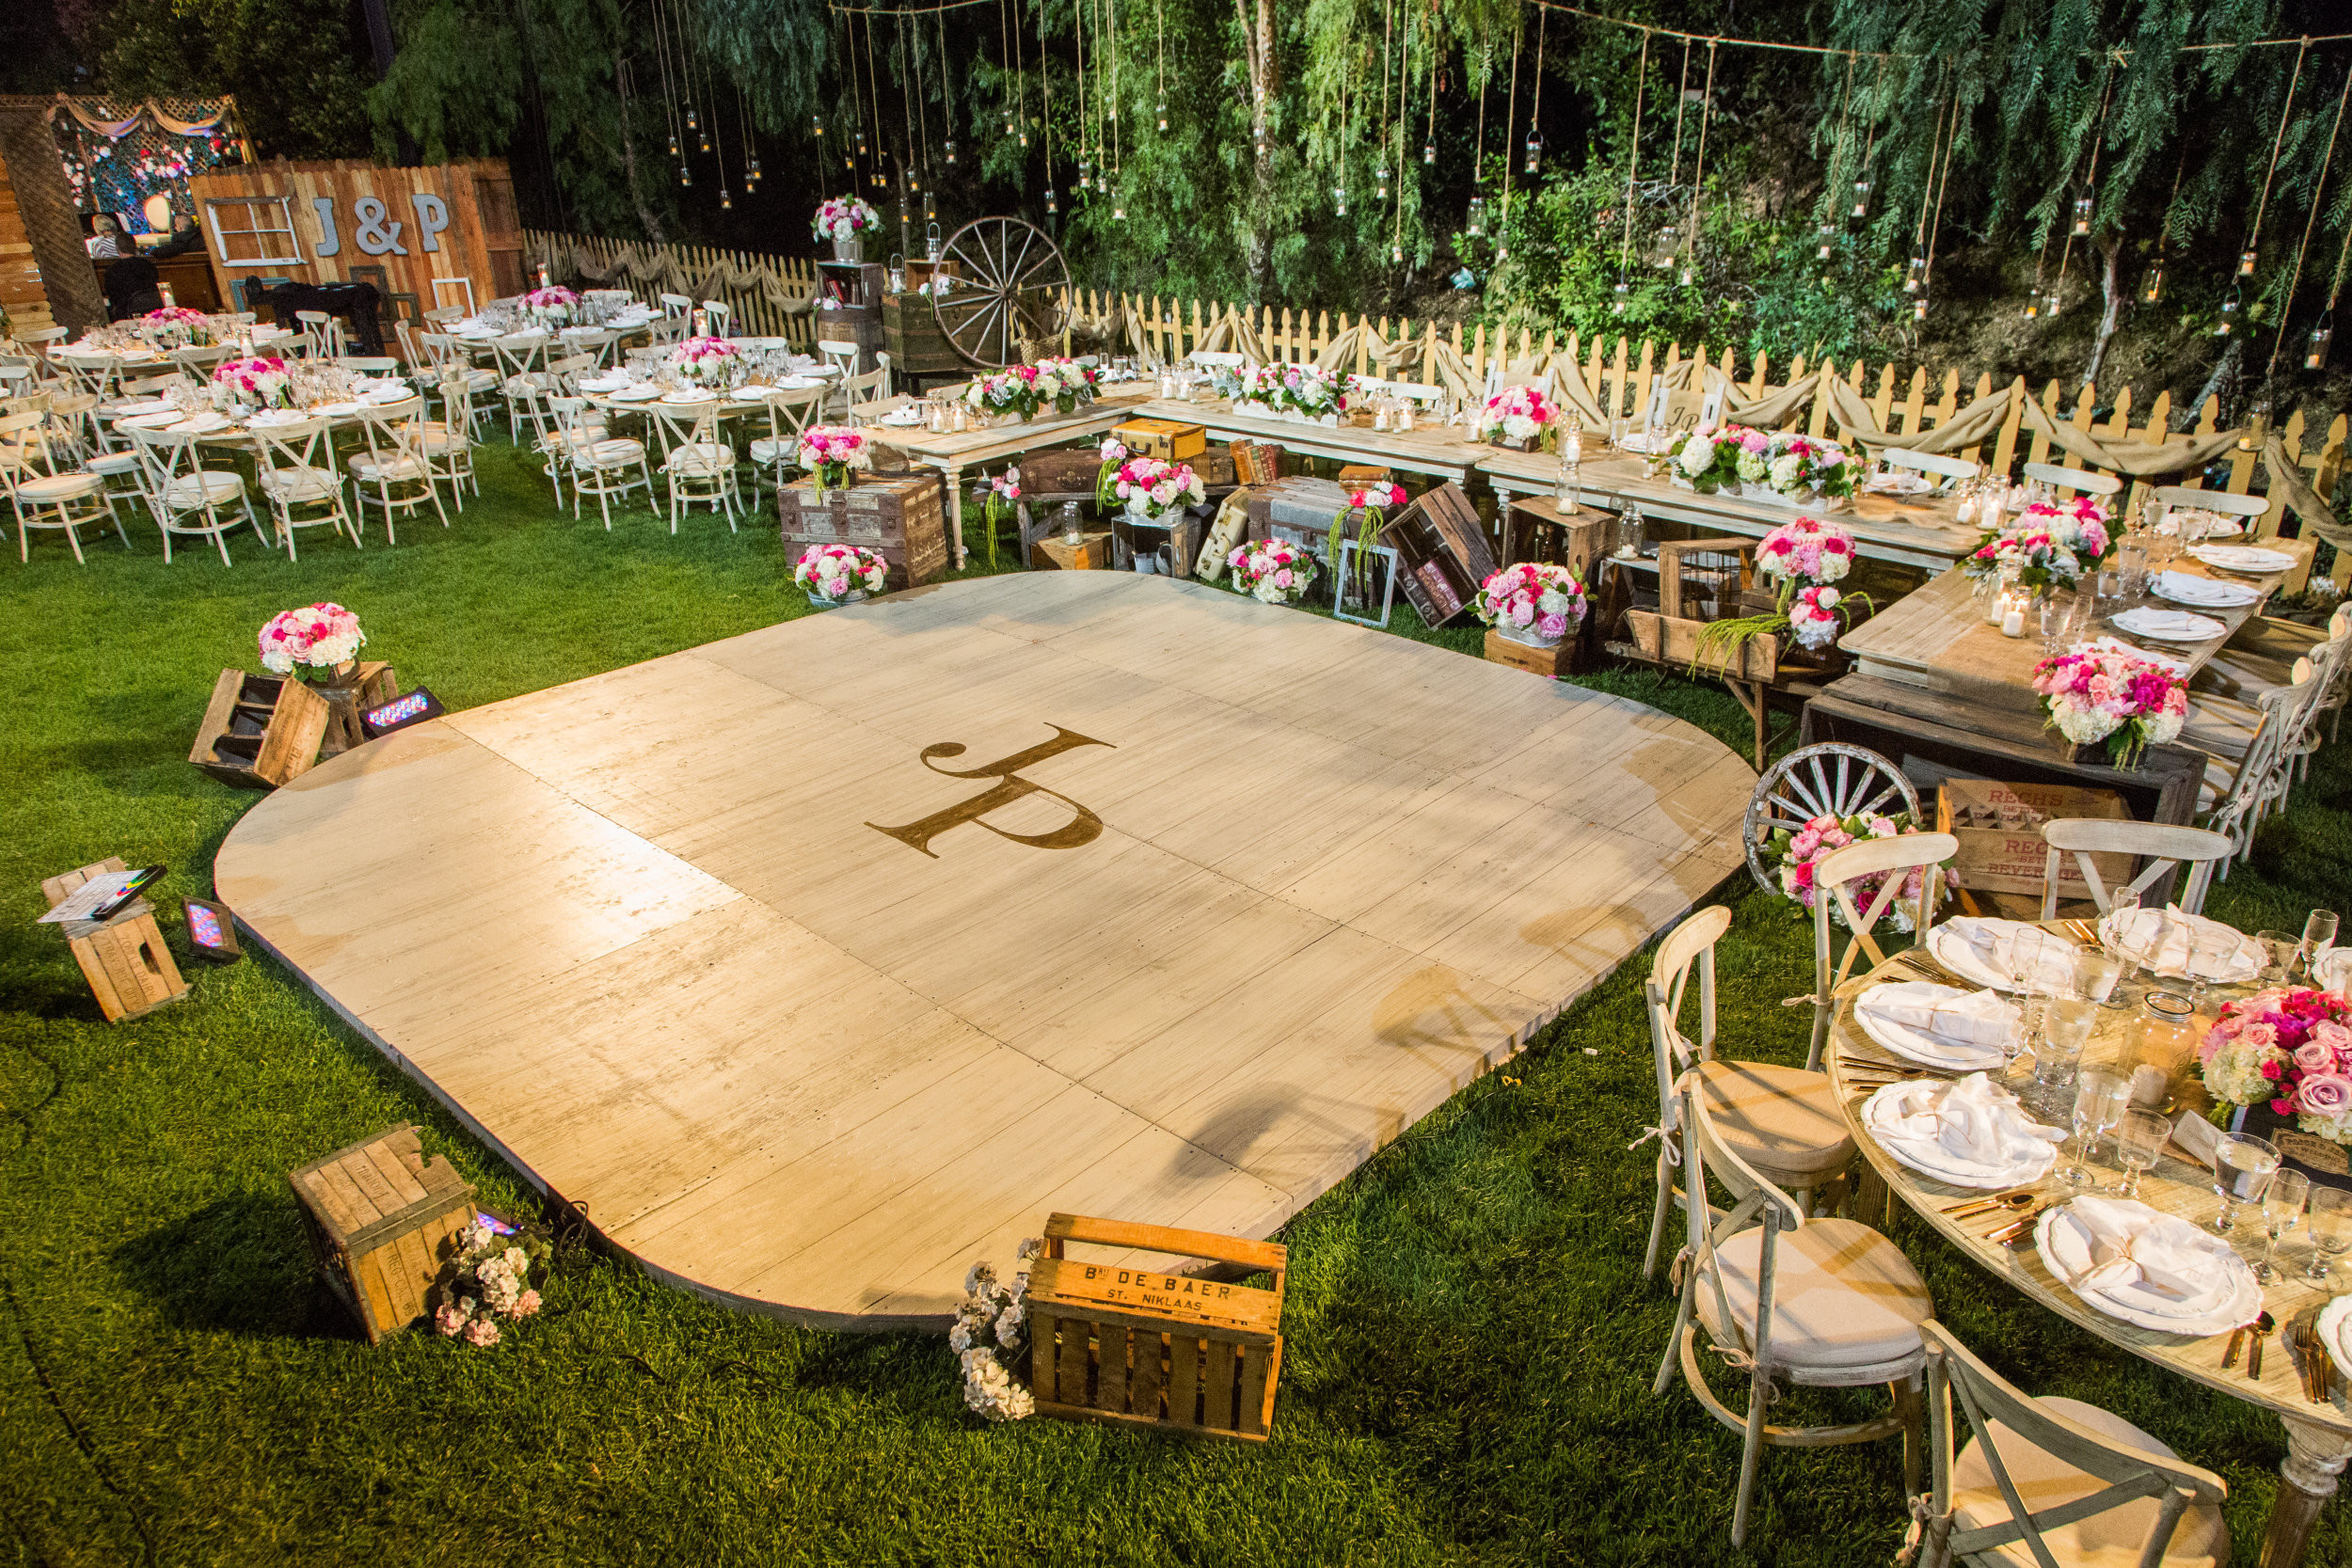 The Best Diy Outdoor Dance Floor - Home, Family, Style and ...